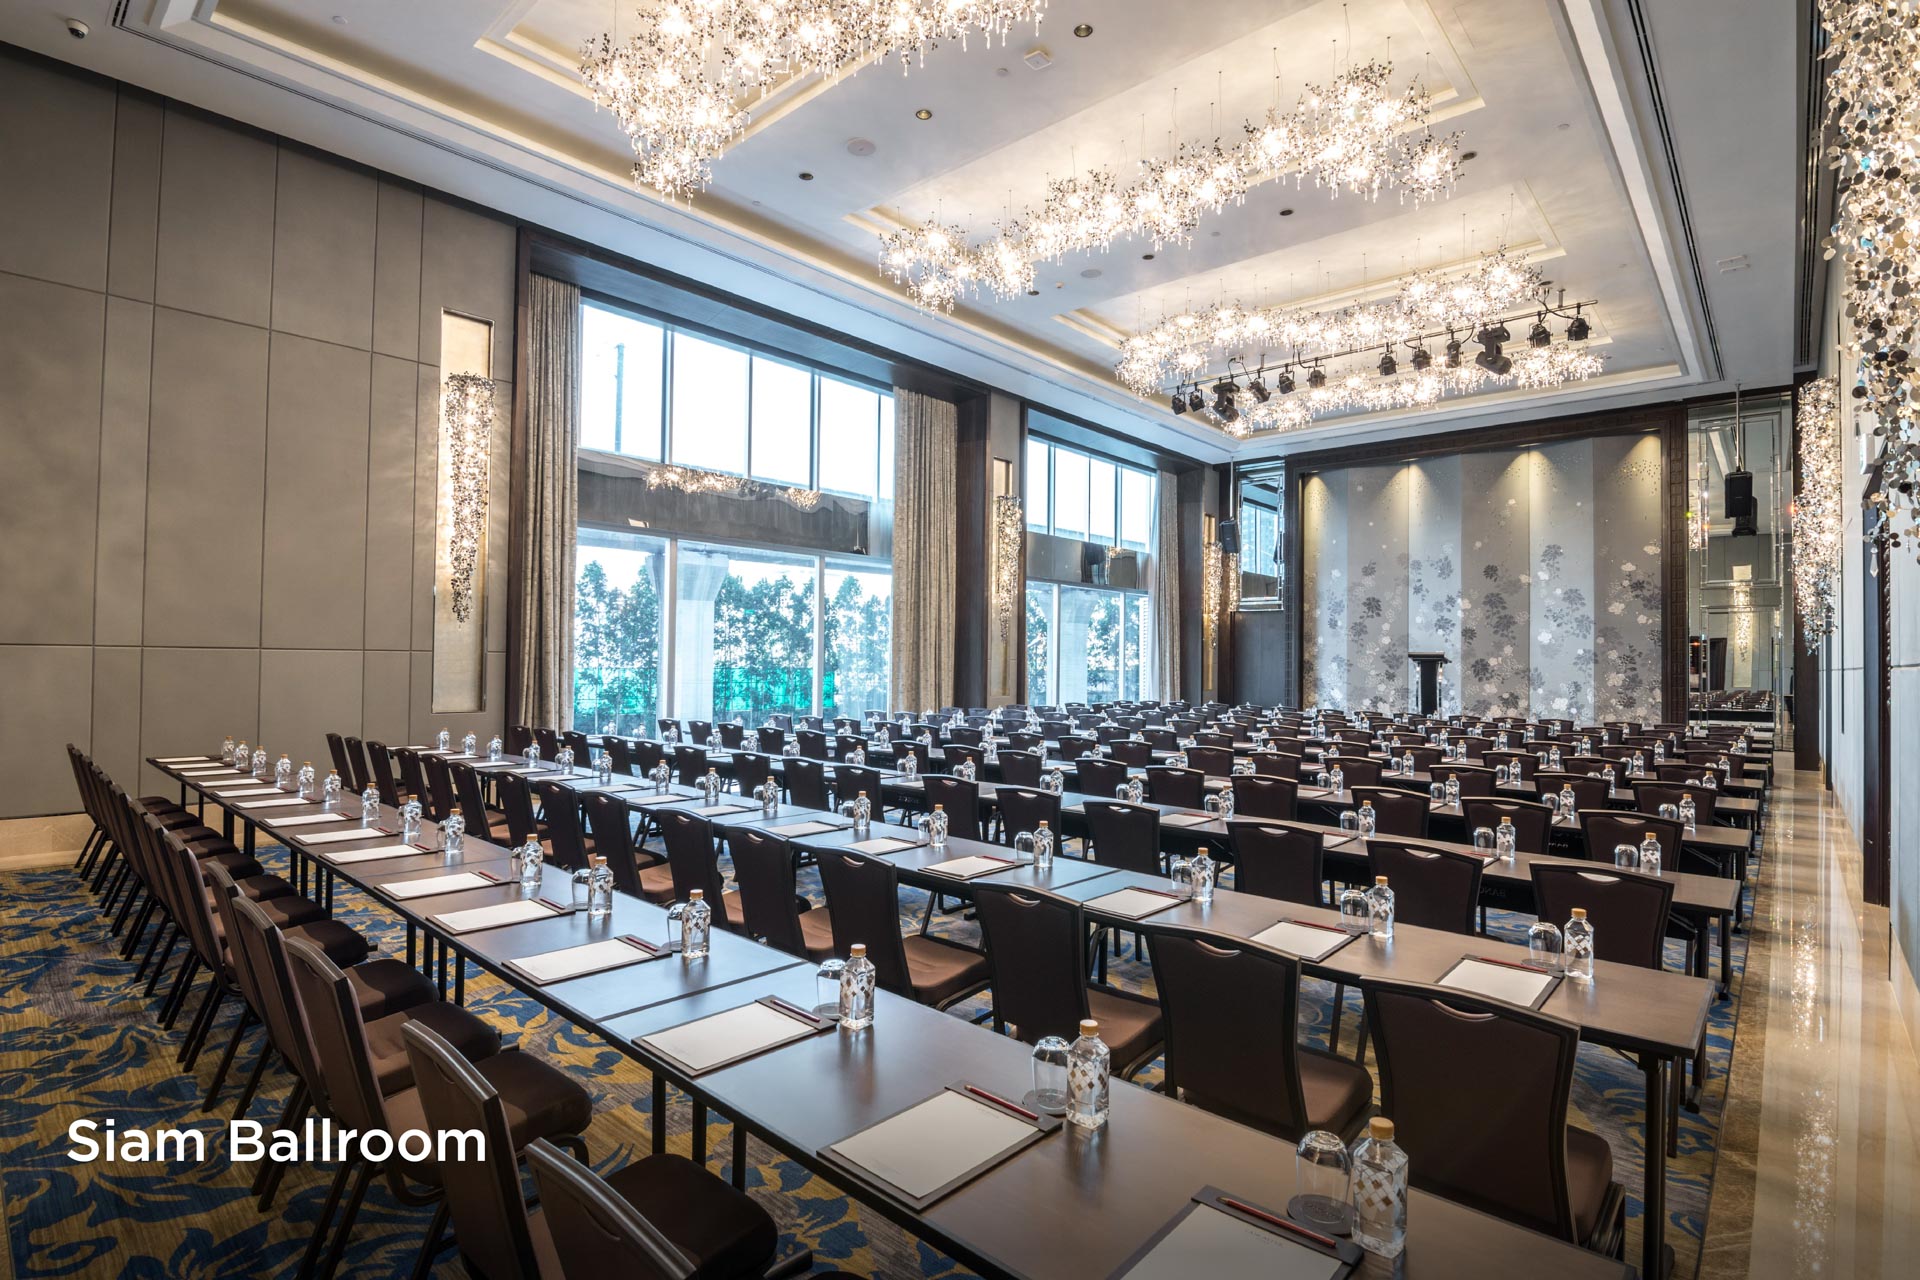 Siam Ballroom Meeting and Event Space